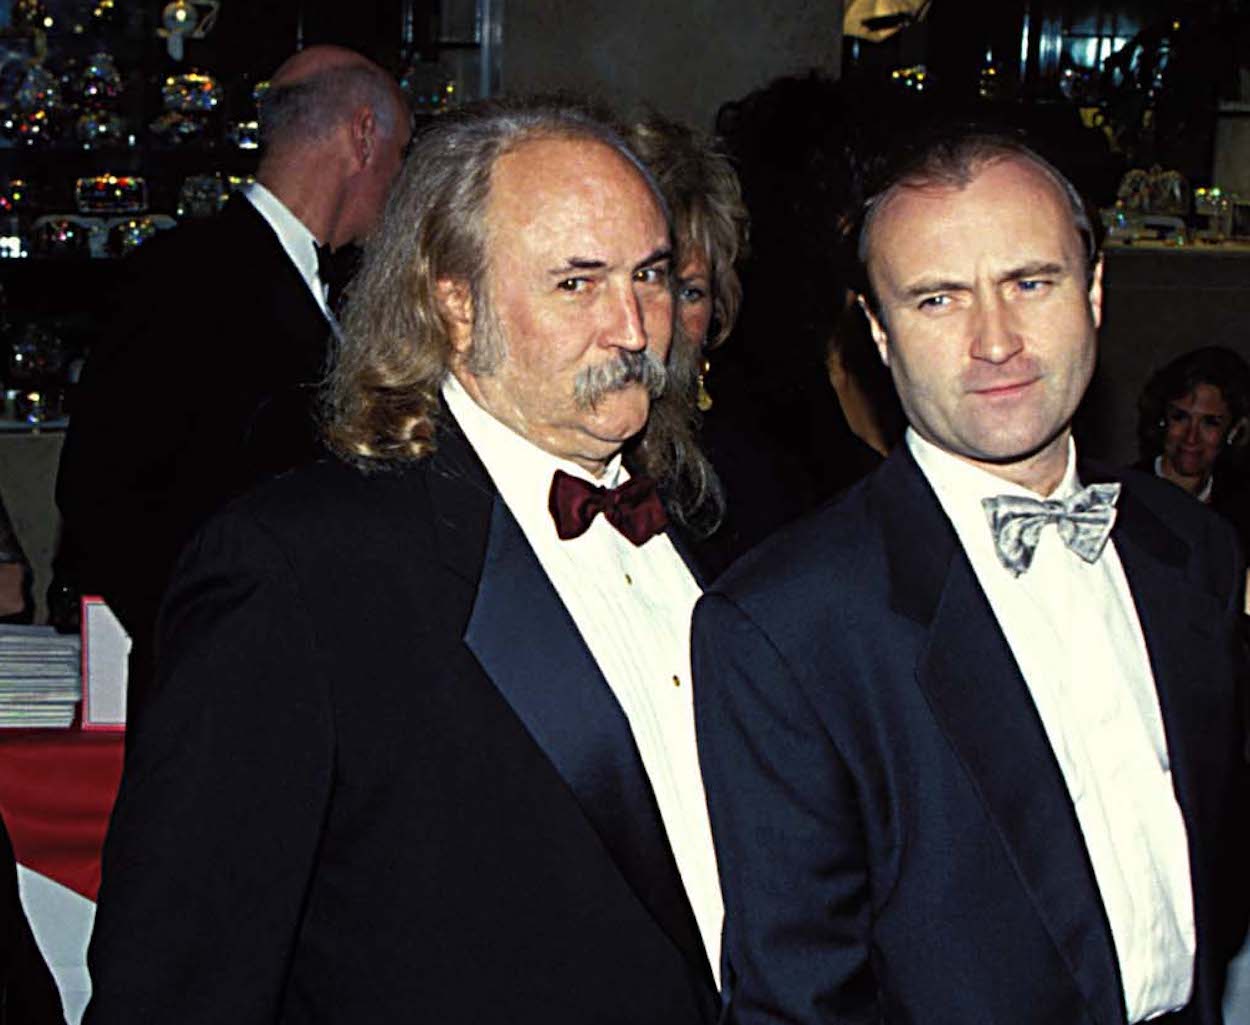 Did Phil Collins Pay for David Crosby’s Liver Transplant?